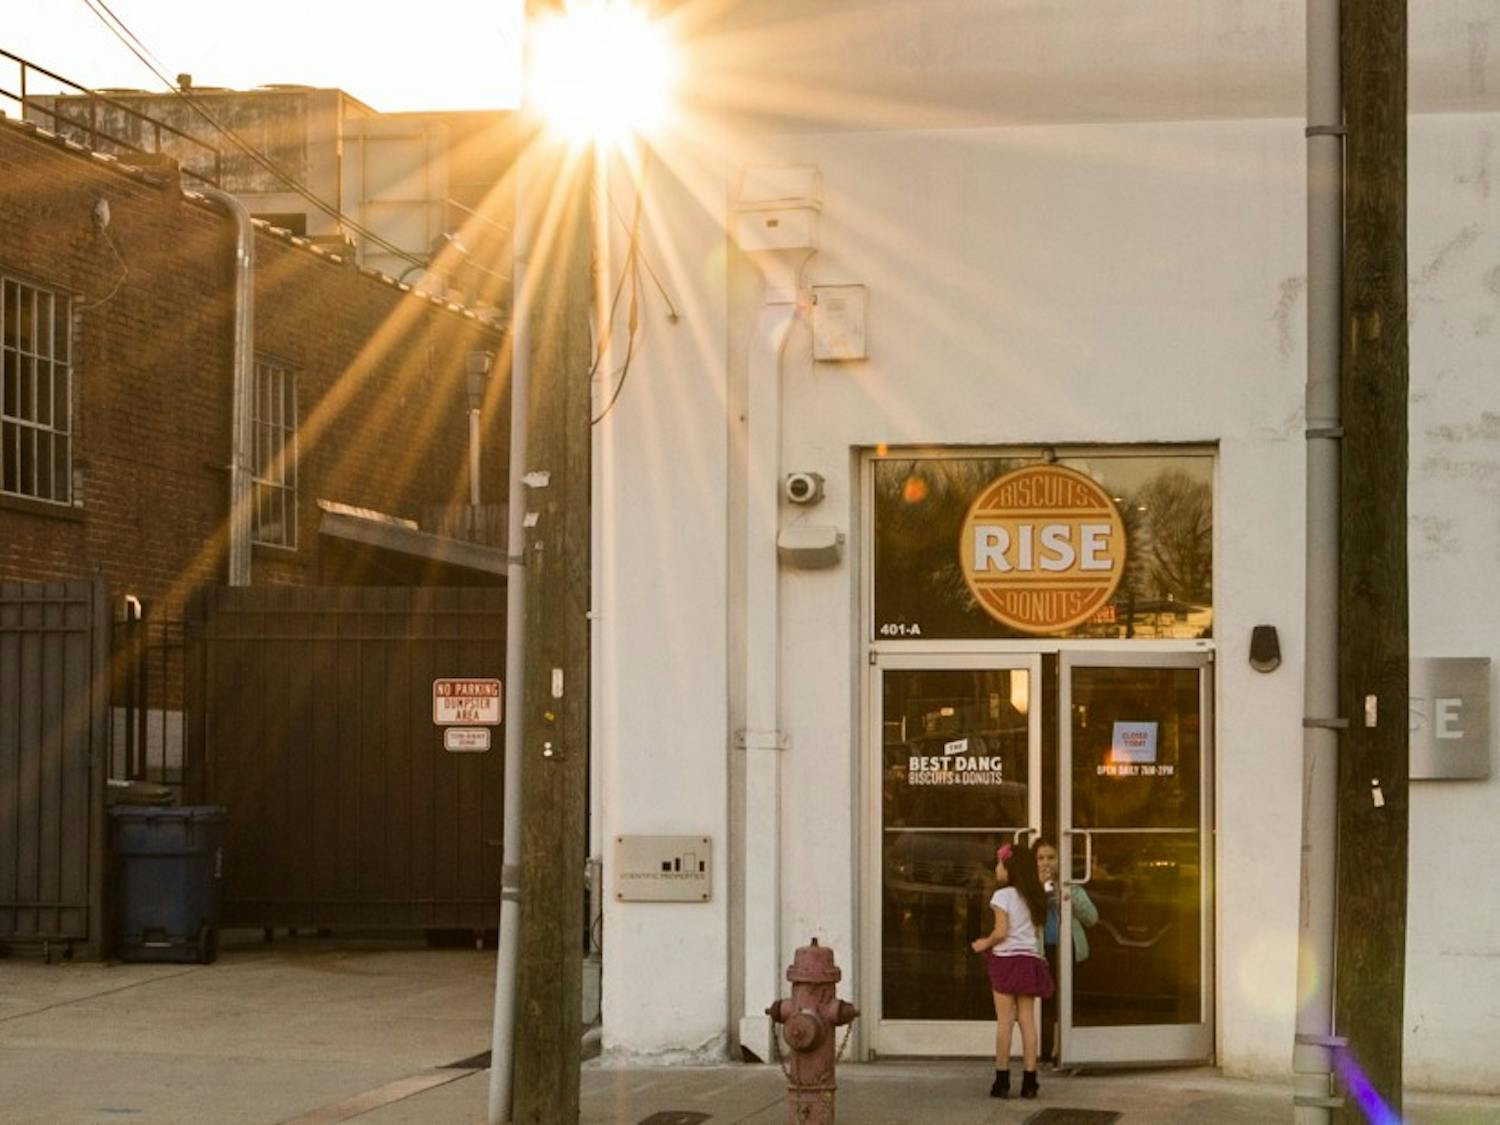 The bakery Rise was selected as the eatery with the Best Biscuit in the Triangle two years in a row and recently opened a new location in downtown Durham.